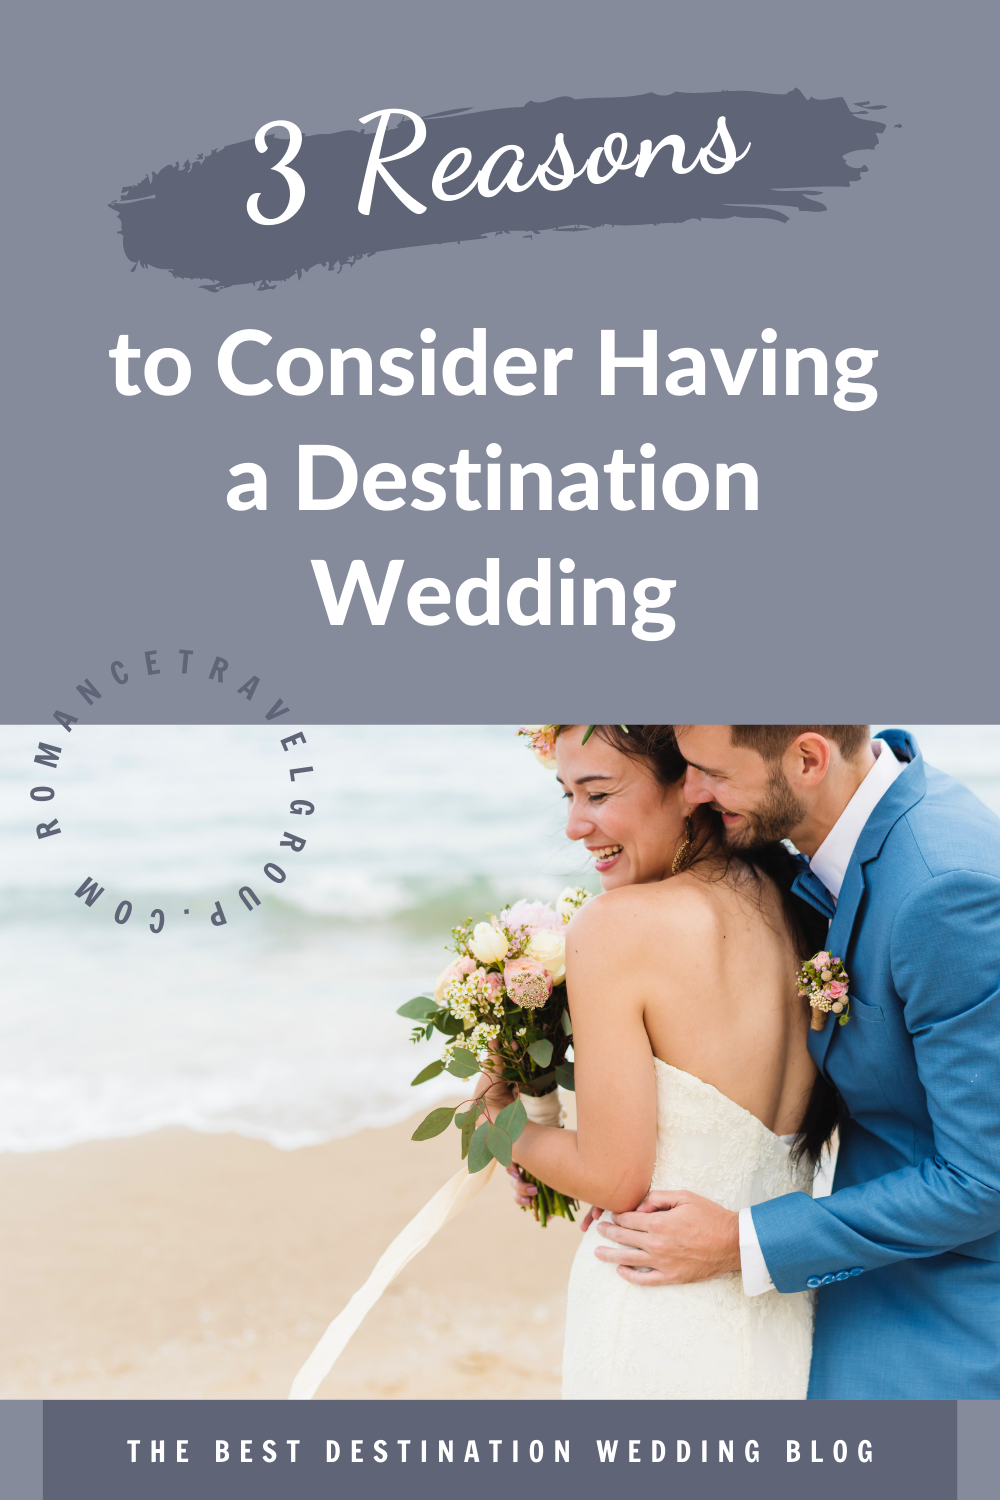 3 Reasons to Have a Destination Wedding